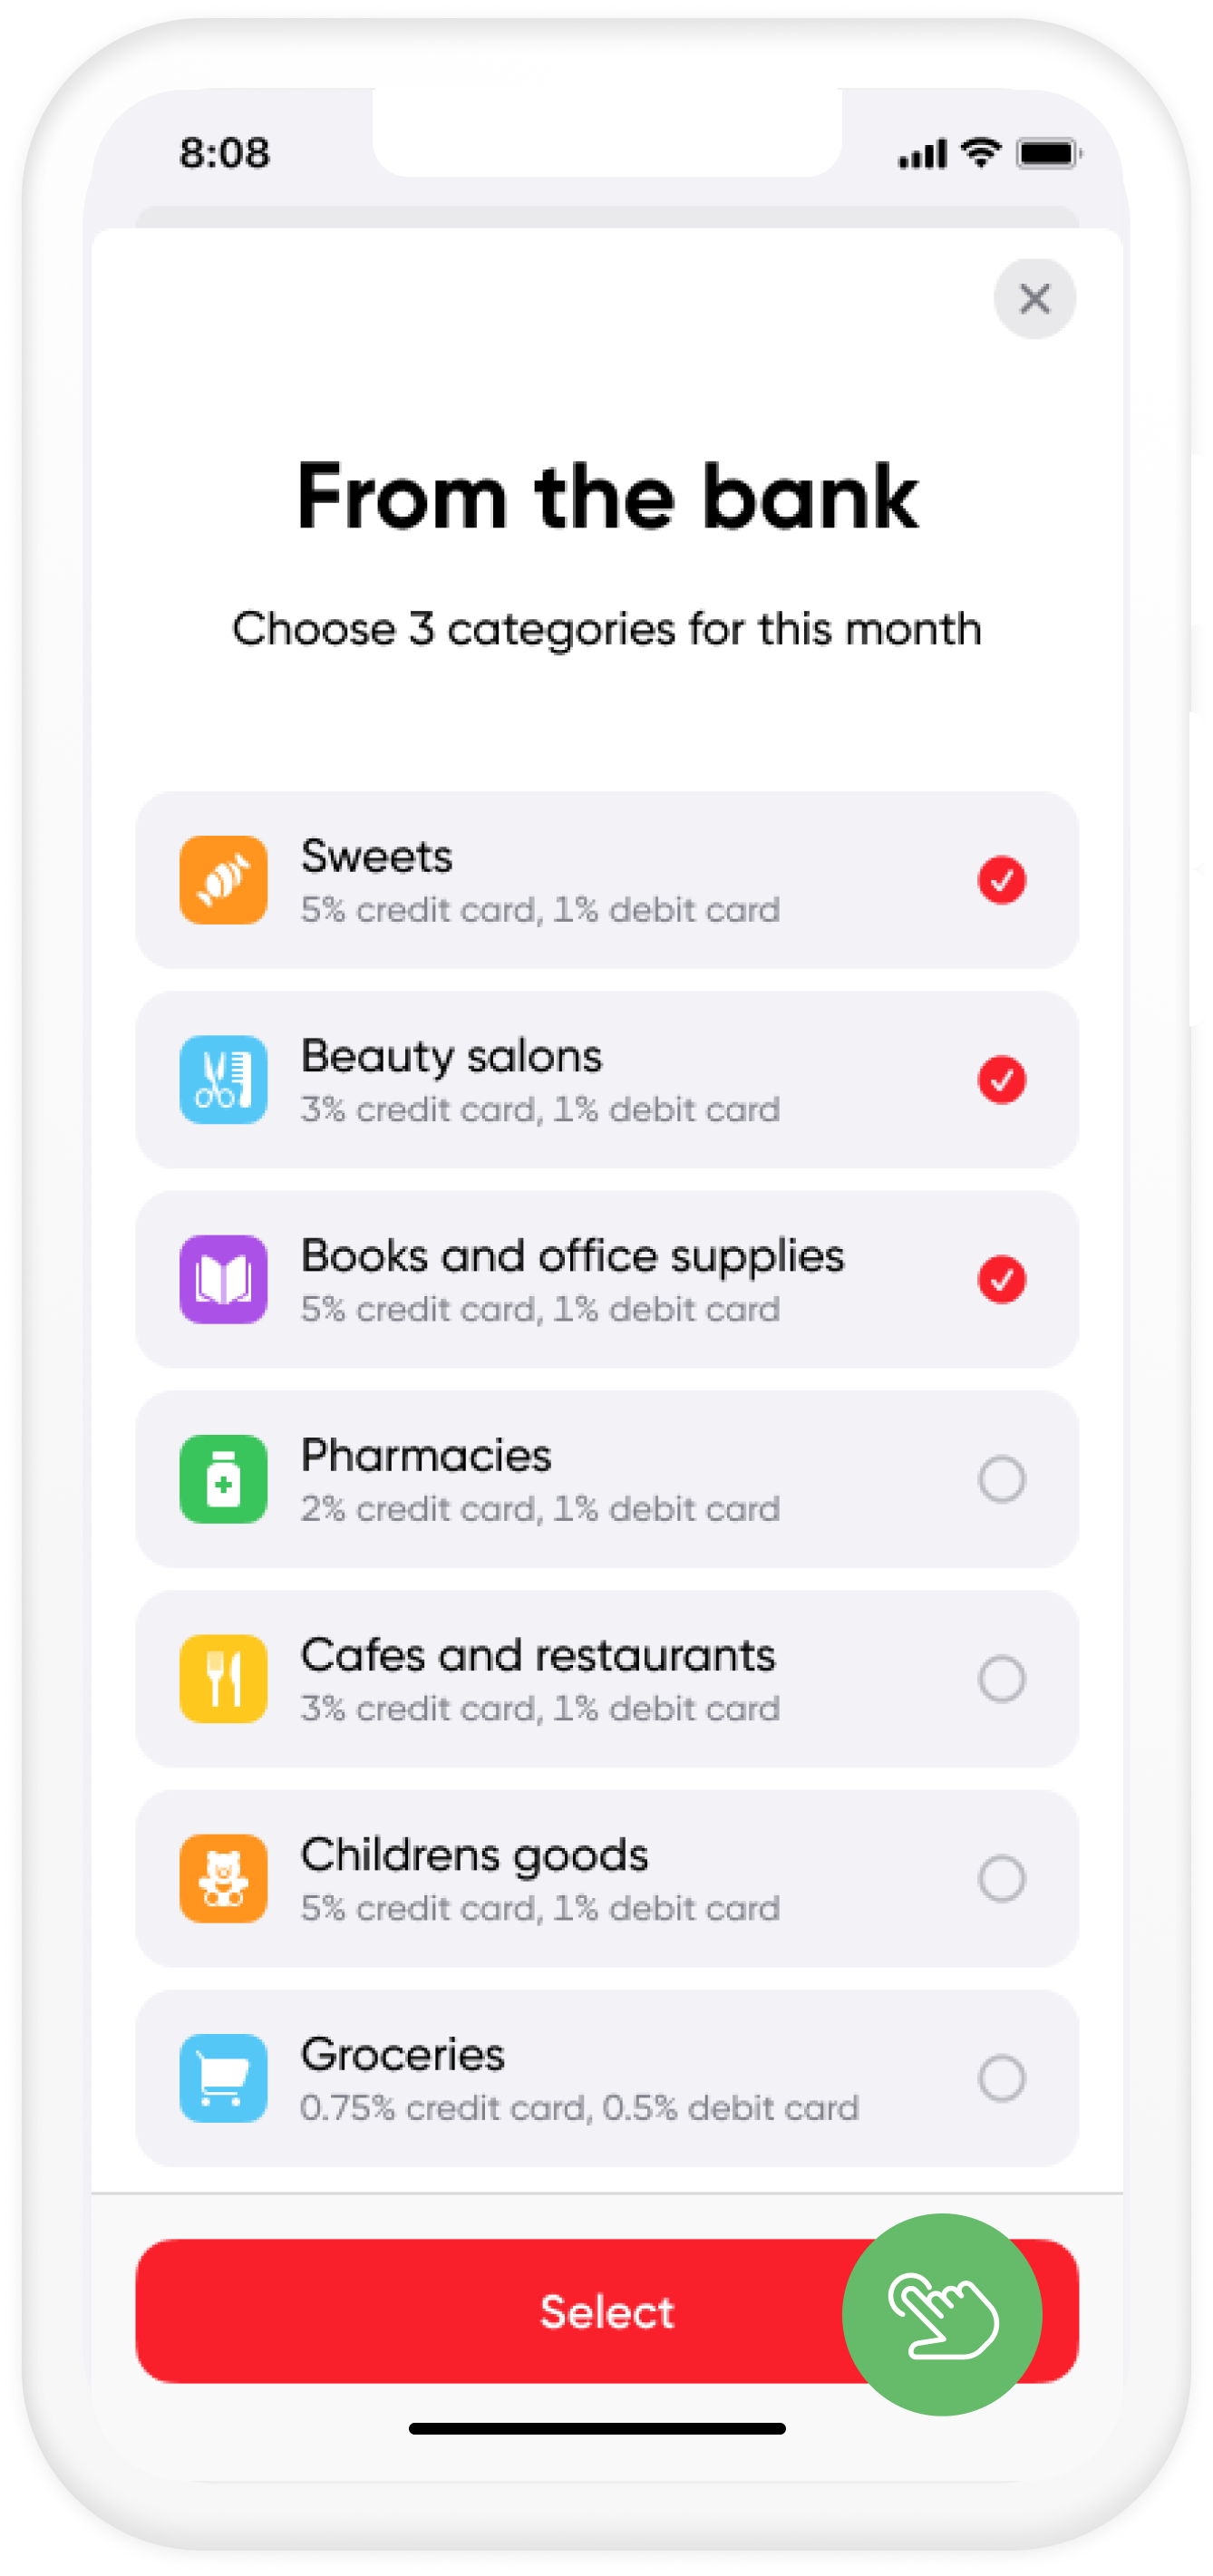 Mark the desired cashback categories from the Bank this month and fix them with the "Select" button